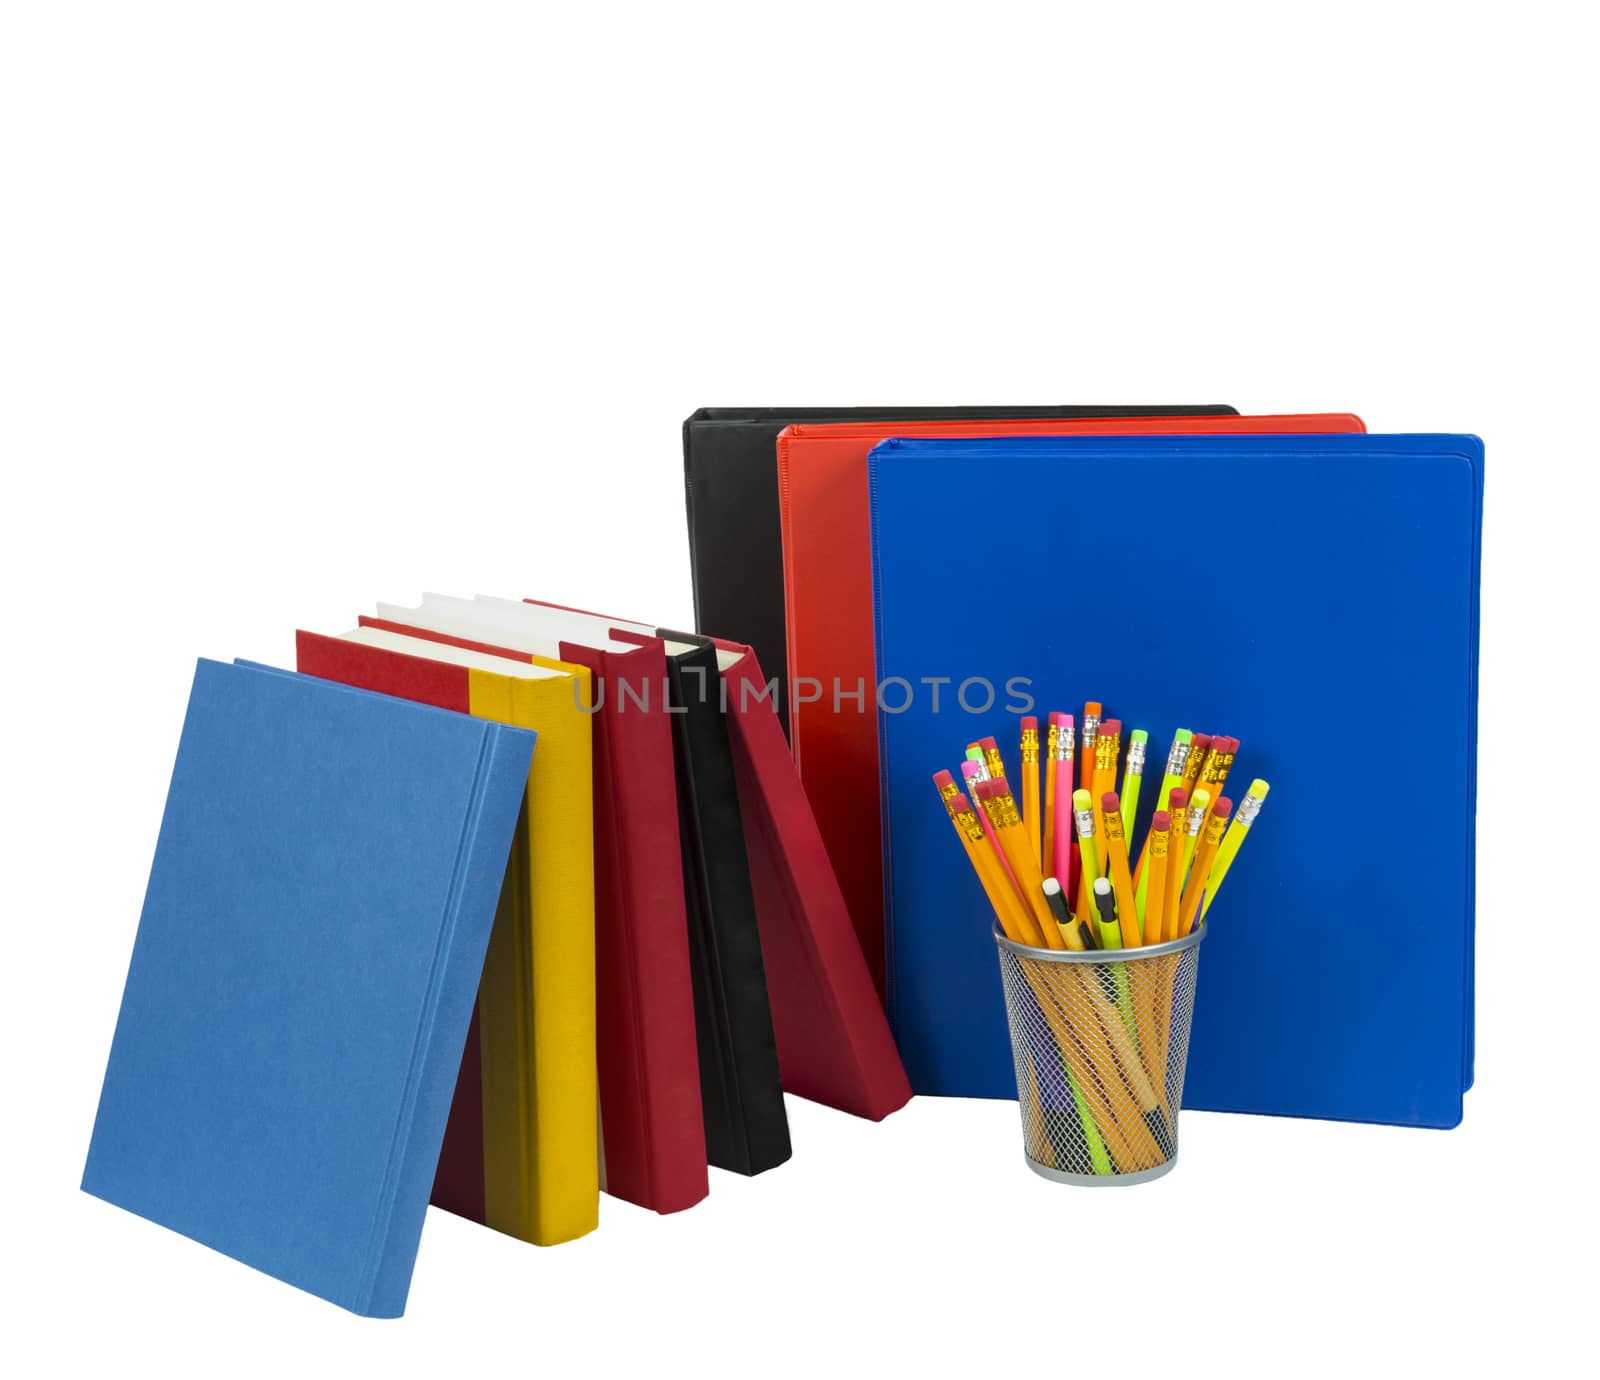 Brightly colored horizontal shot of books, notebooks and pencils in pencil holder isolated on white background